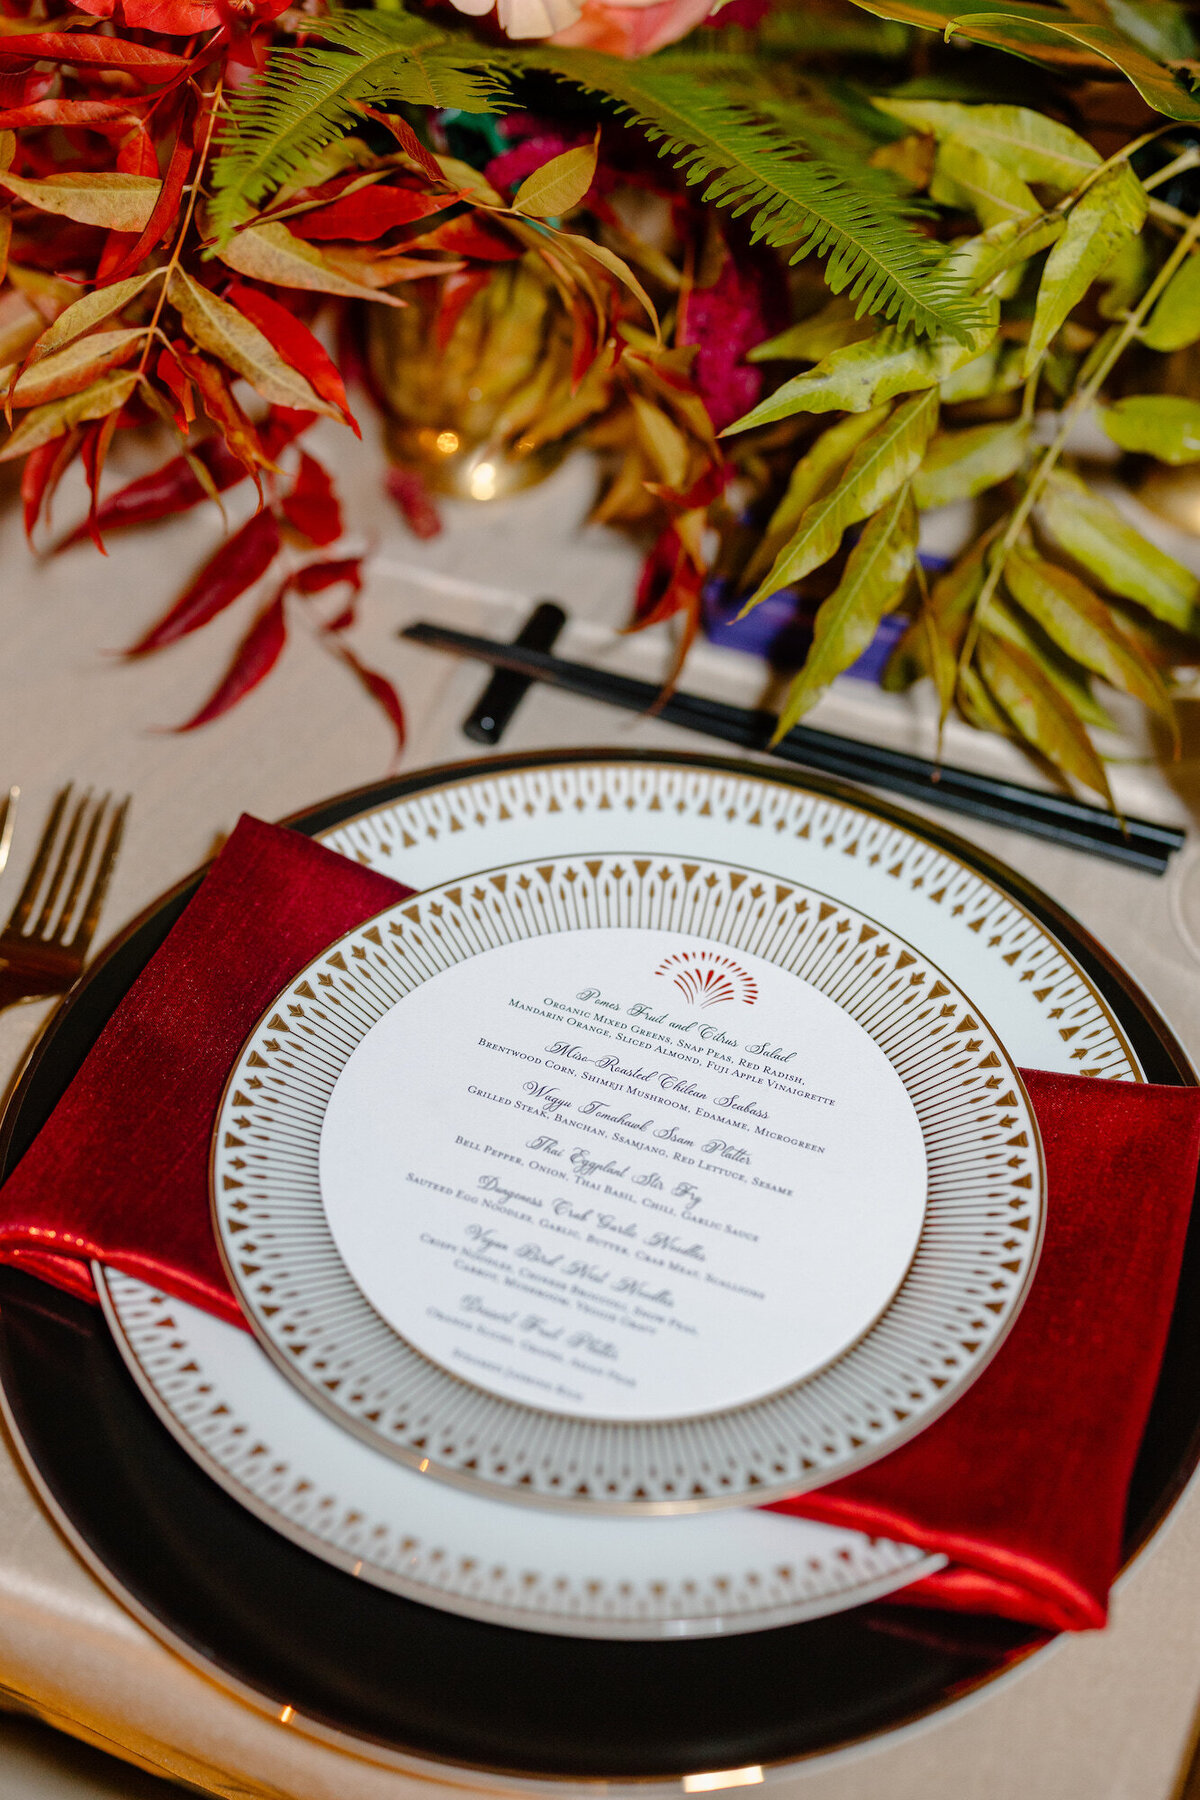 Circular menus on place setting with red napkins